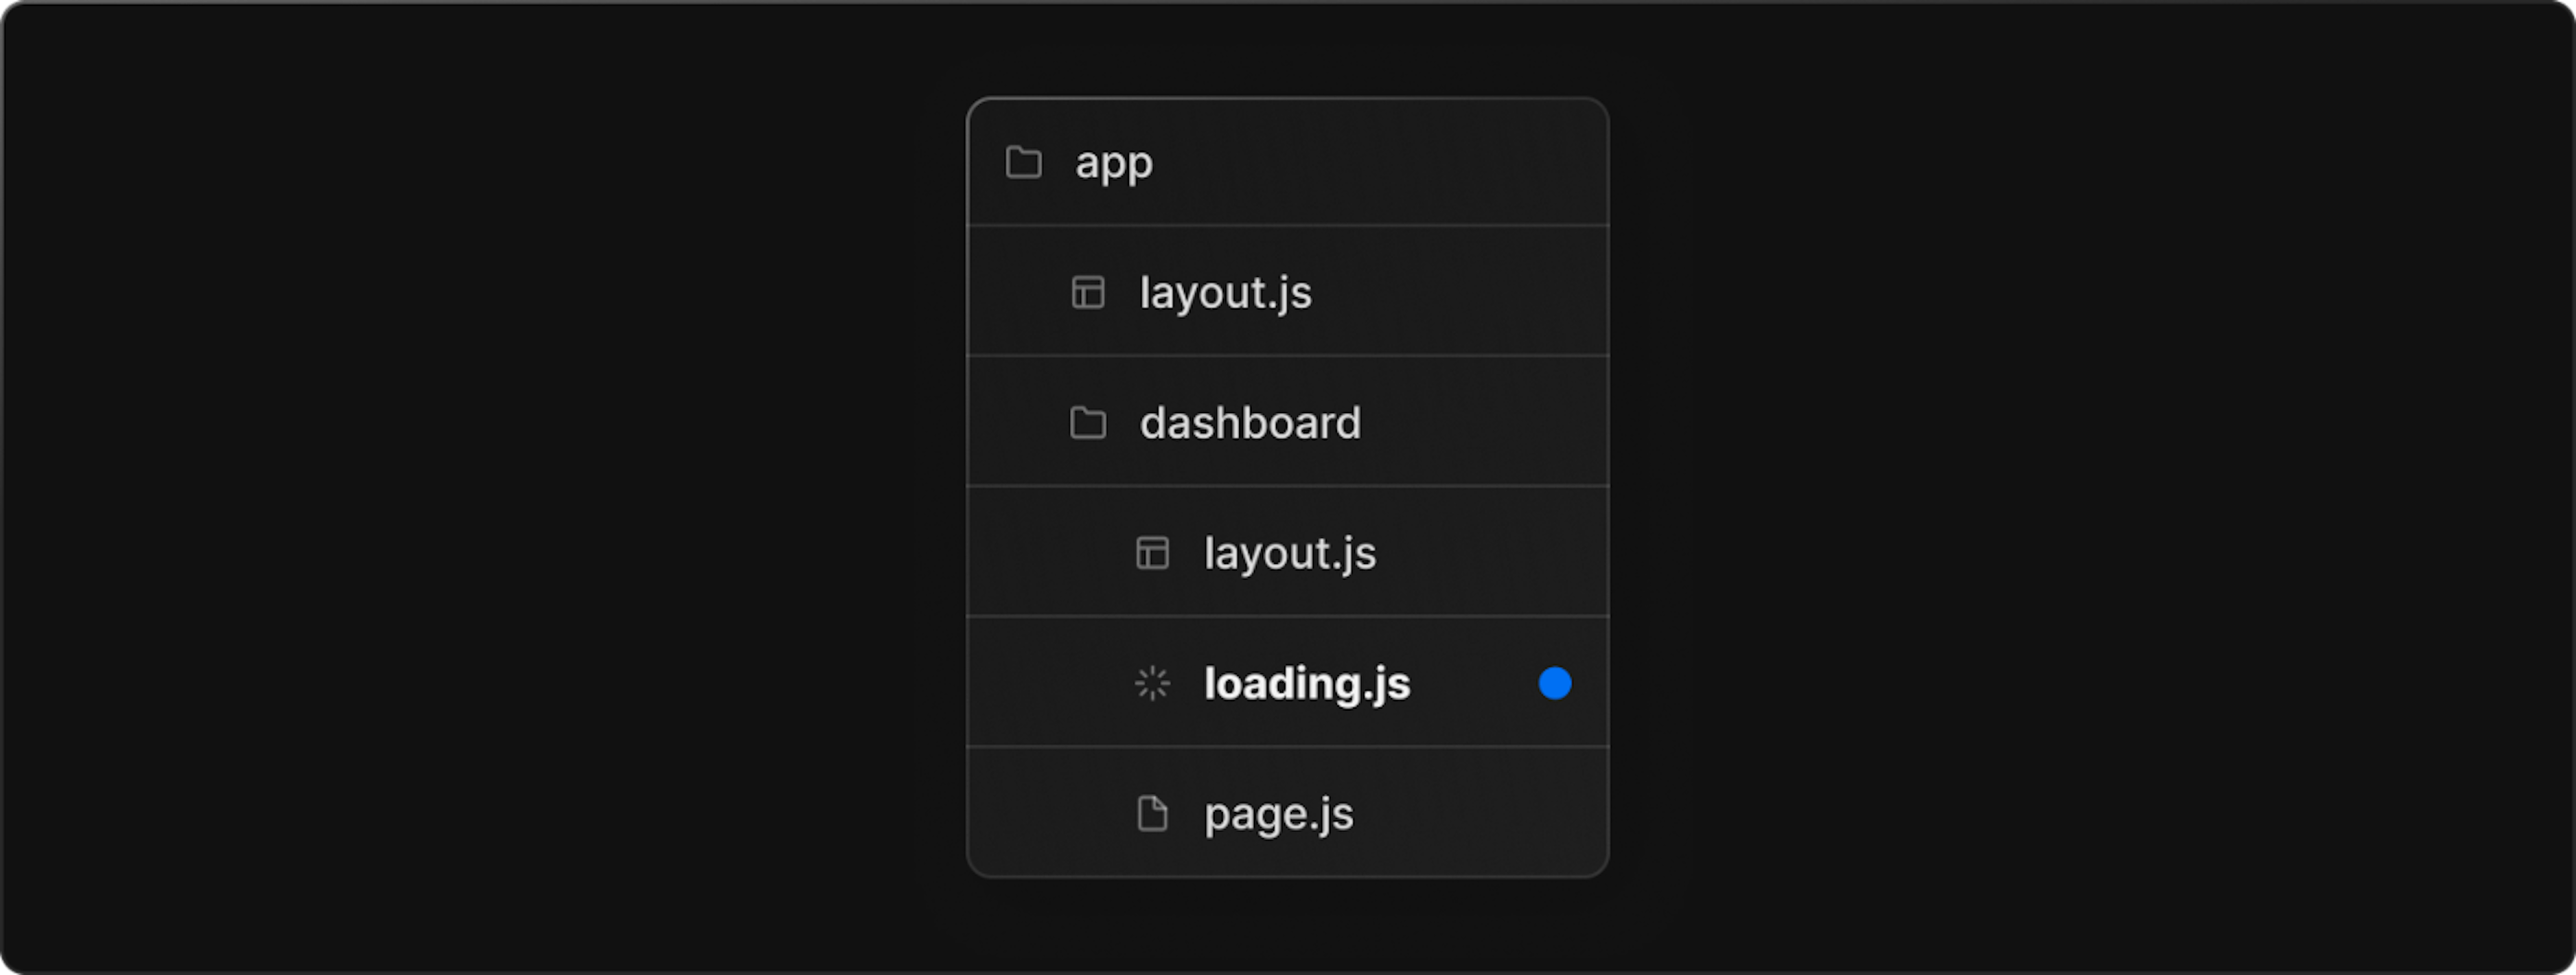 loading.js file in the dashboard route segment